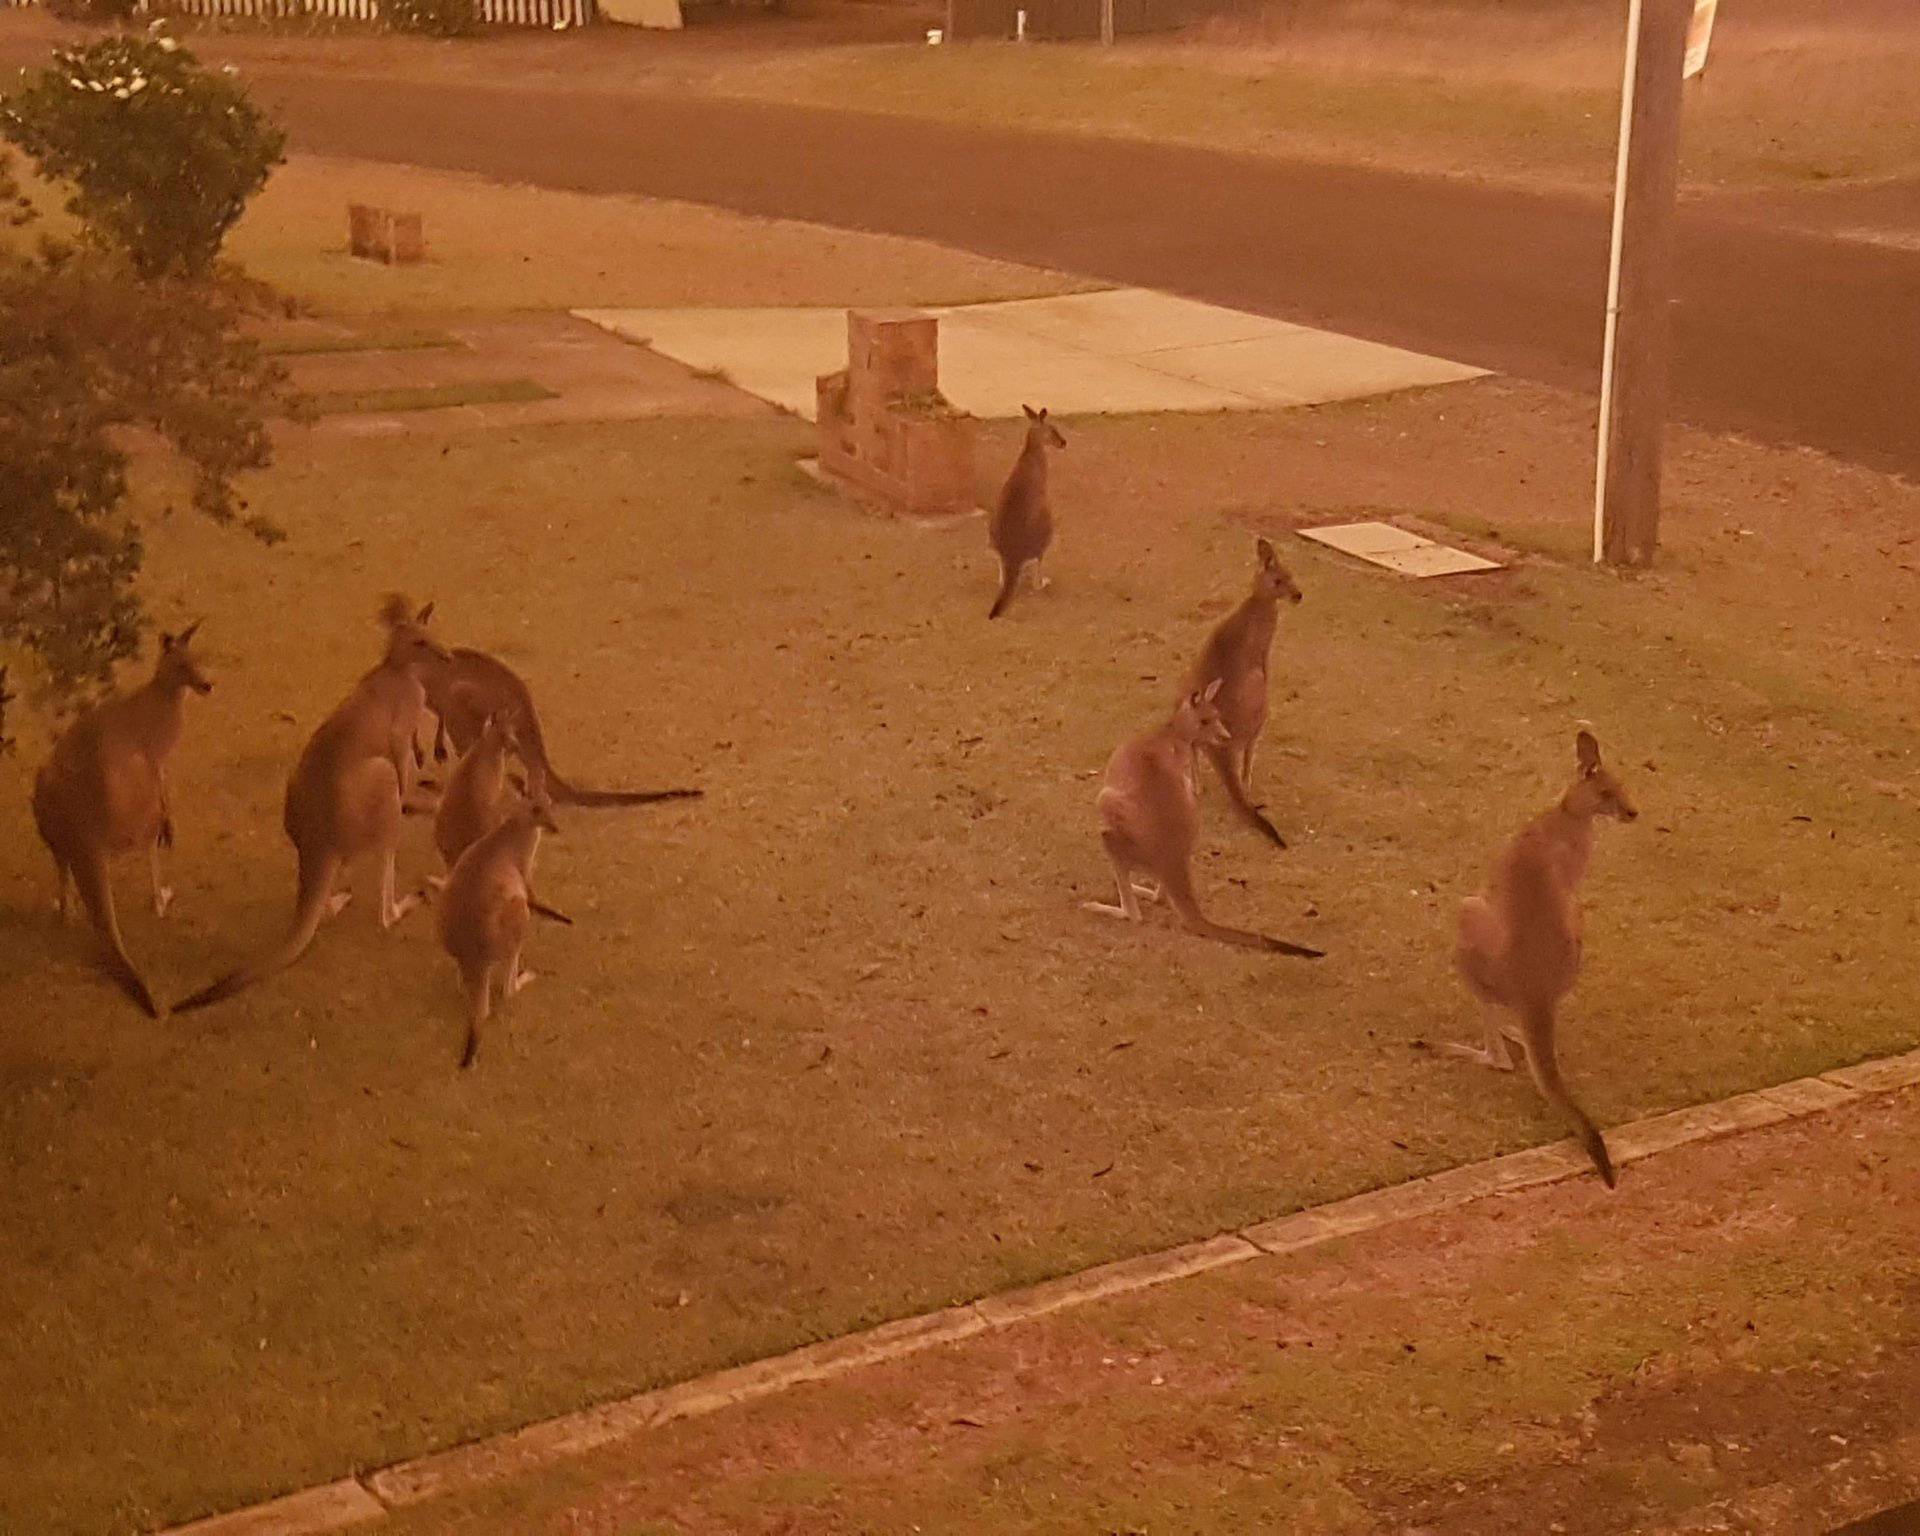 Kangaroos gather at a residential law as bushfires continue to spread